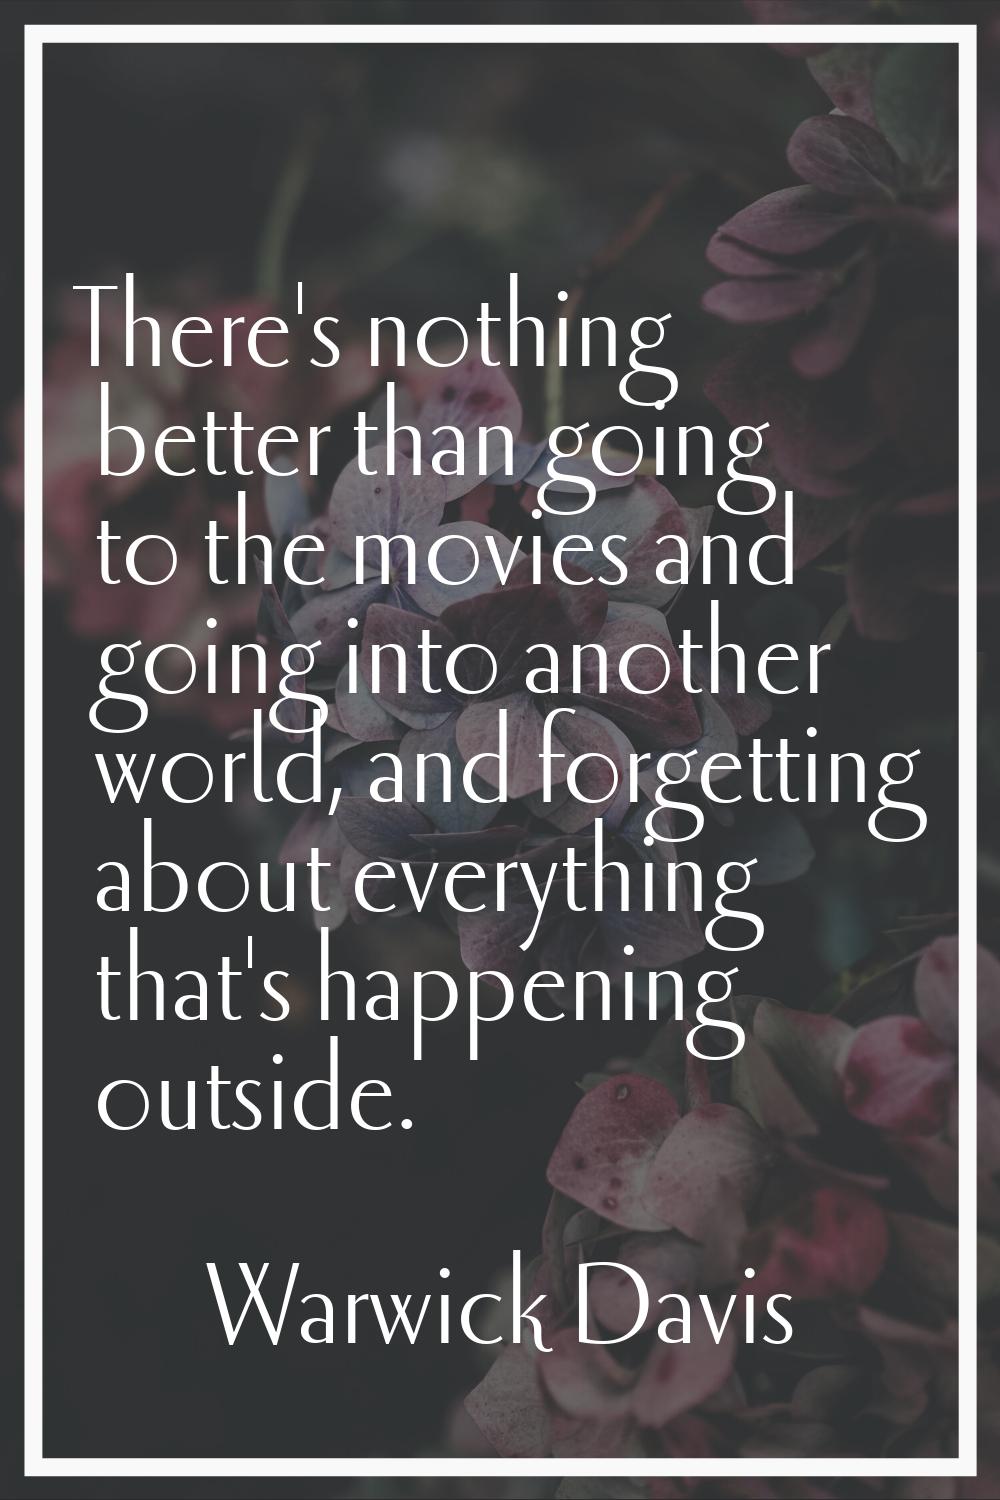 There's nothing better than going to the movies and going into another world, and forgetting about 